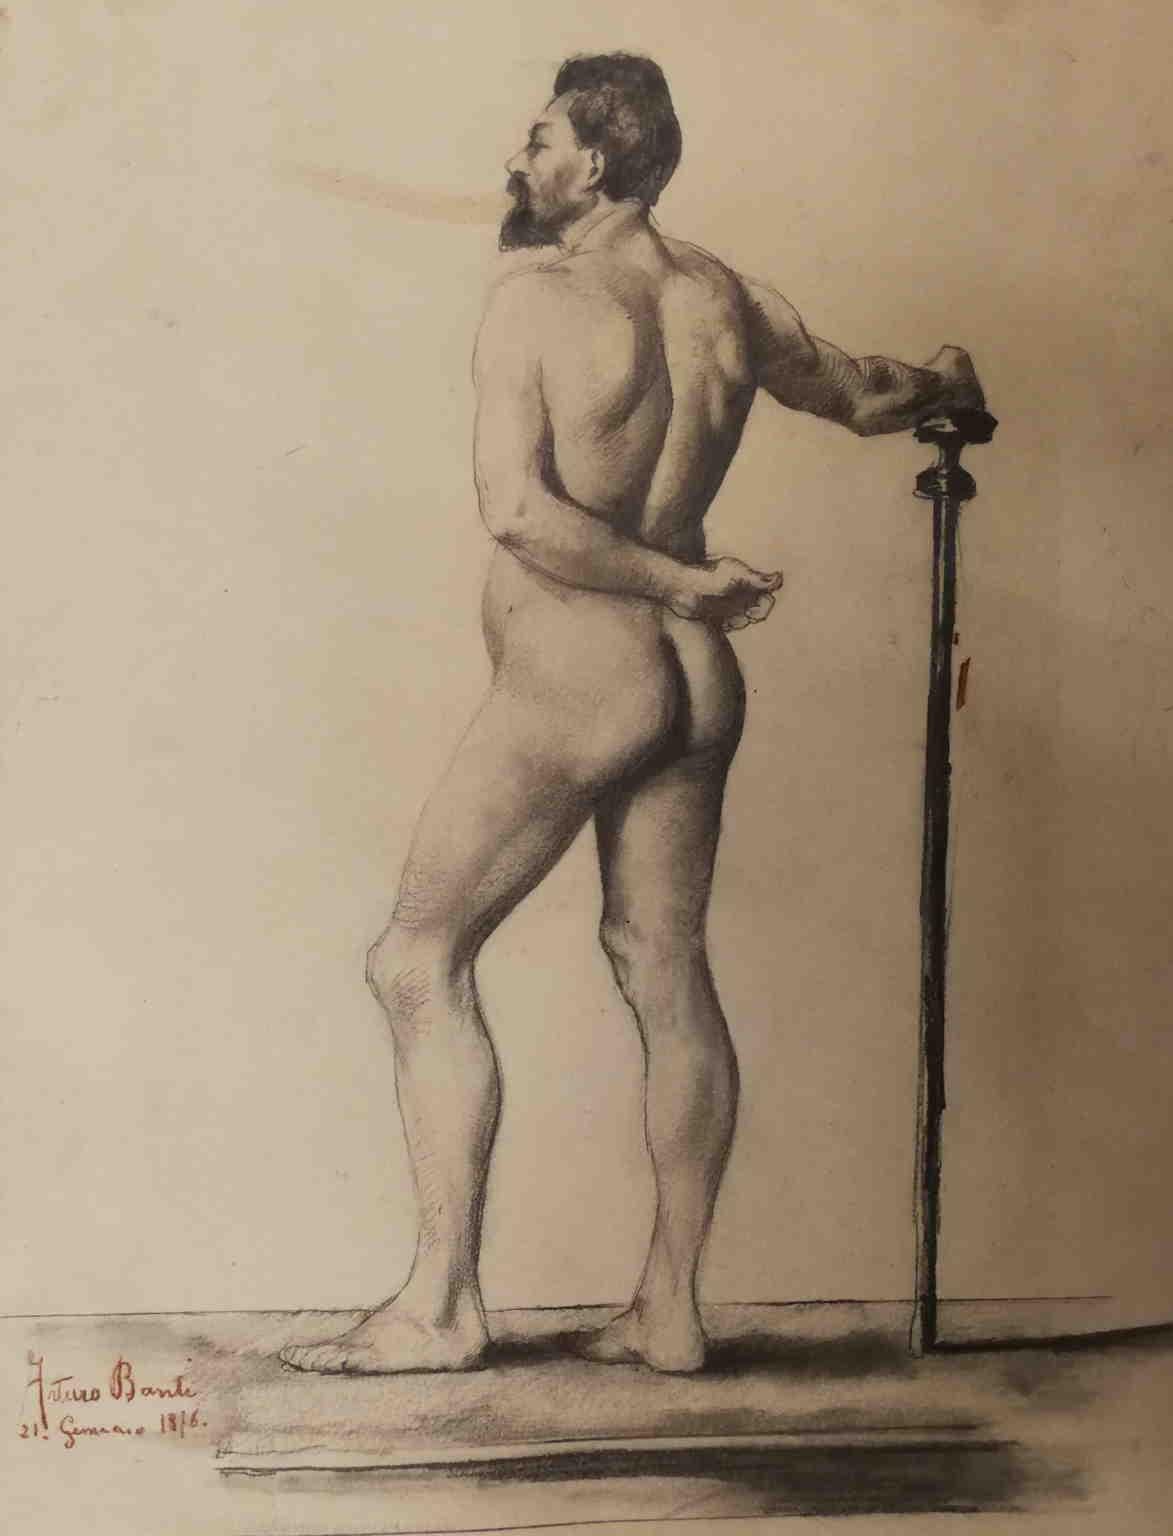 Arturo Banti Portrait - Signed dated Tuscan Banti Male Nude Academy Drawing 19th century pencil paper 